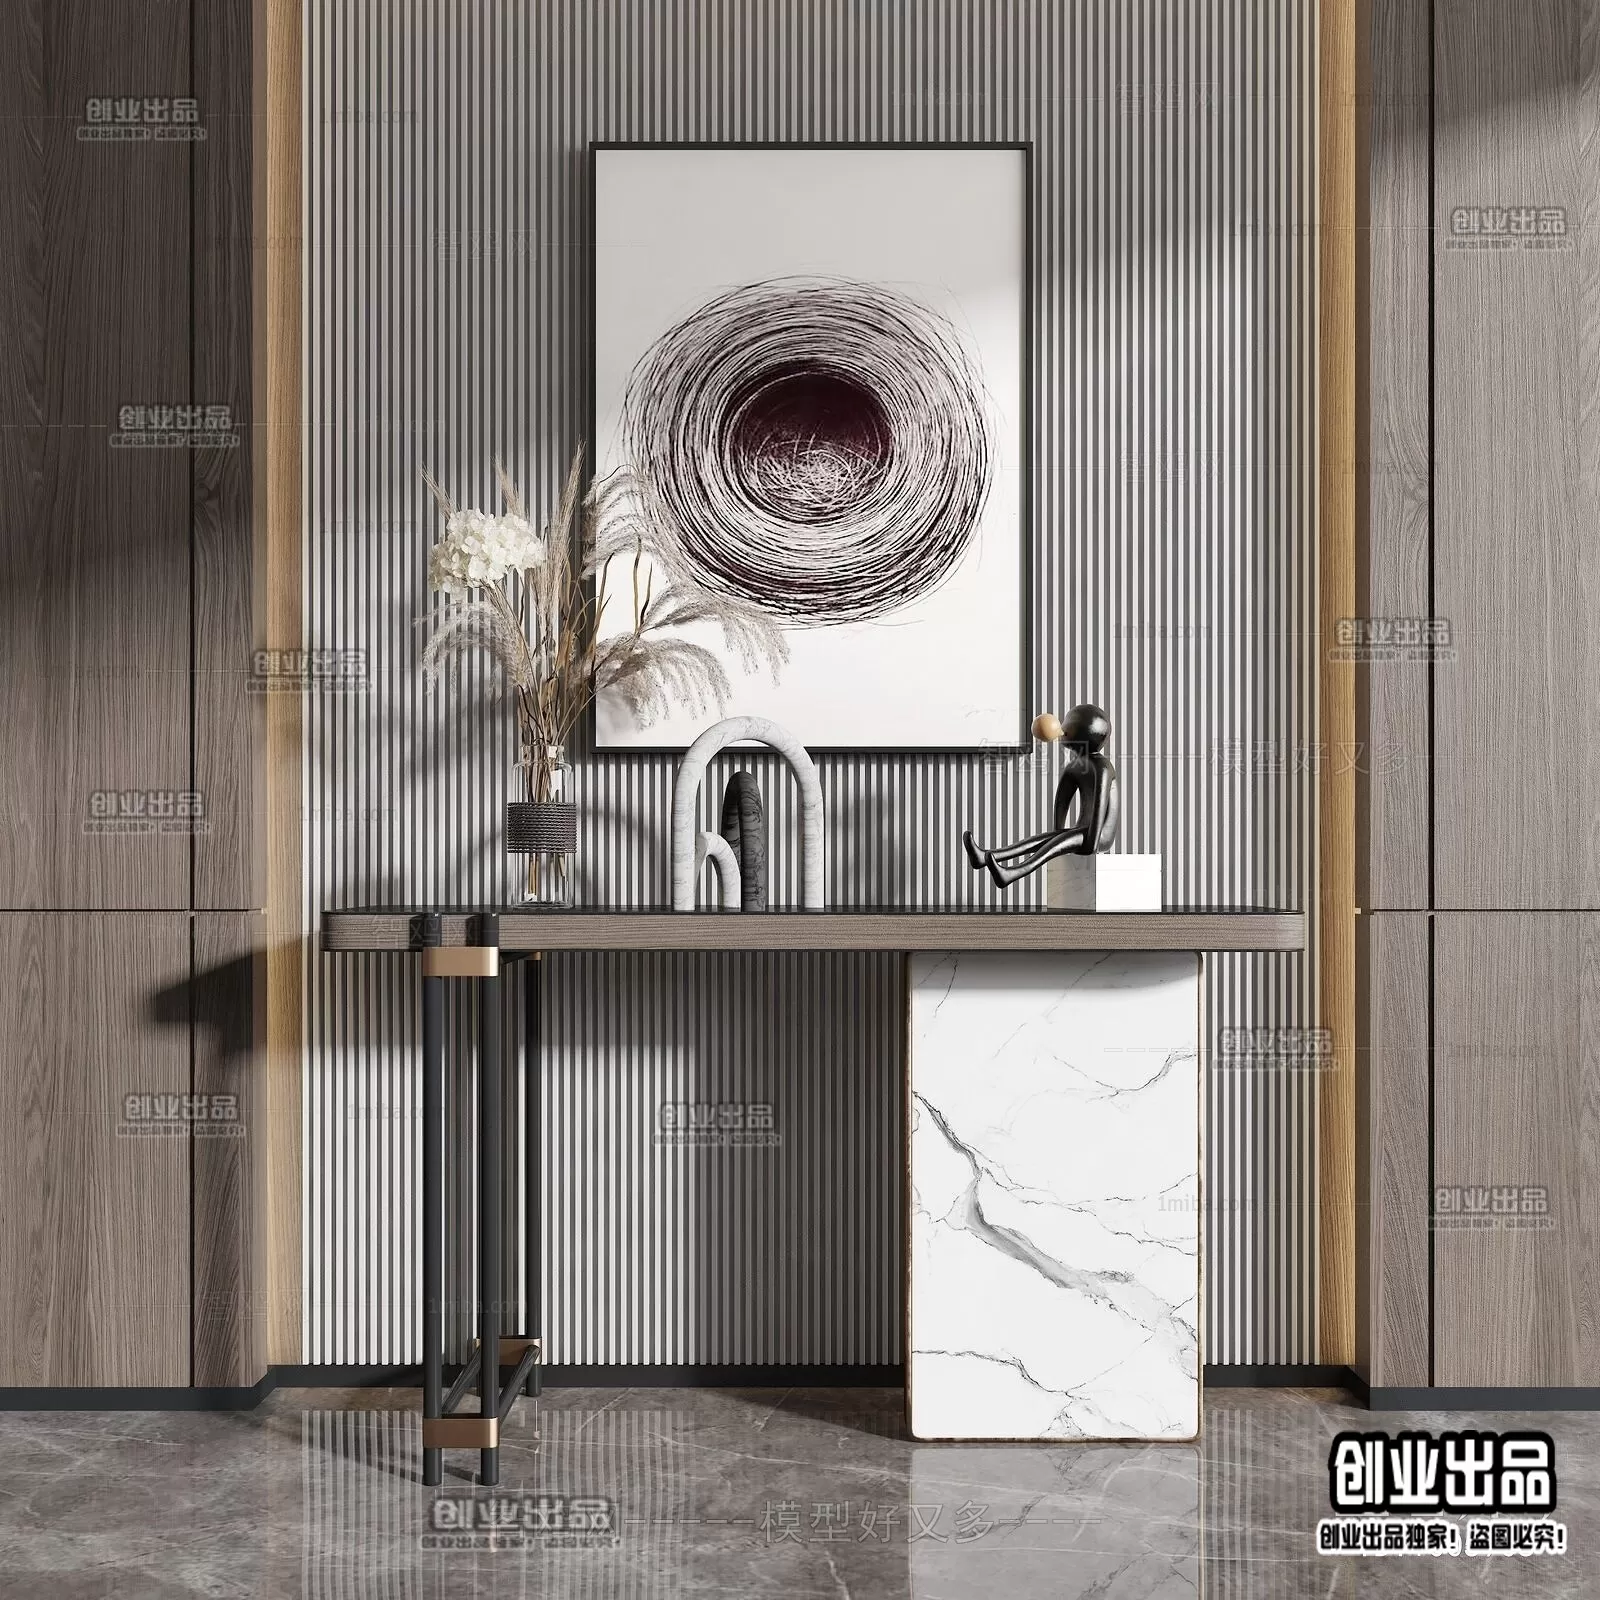 CONSOLE TABLE – 12 – FURNITURE 3D MODELS 2022 (VRAY)